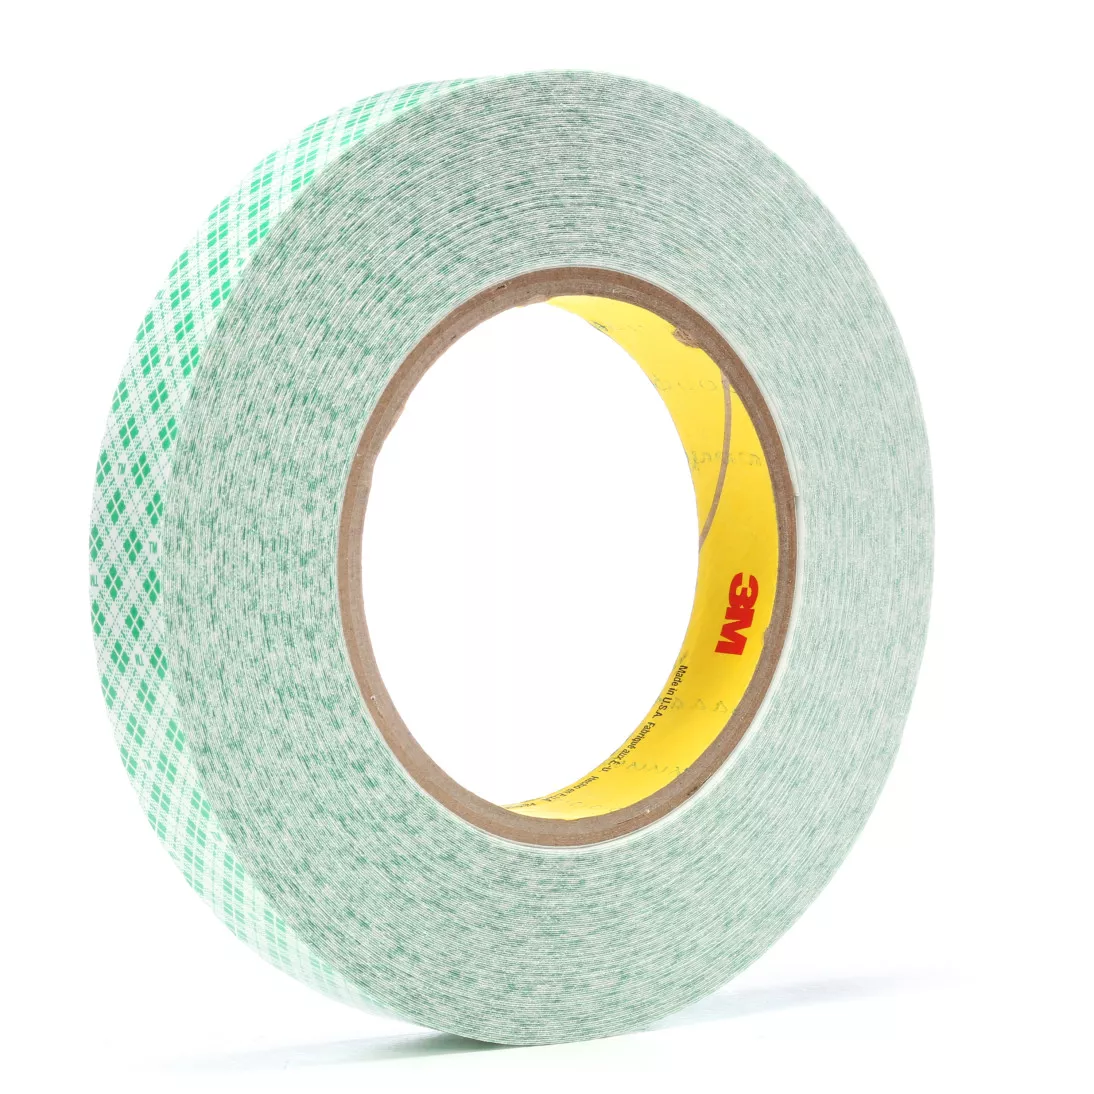 3M™ Double Coated Film Tape 9589, White, 3/4 in x 36 yd, 9 mil, 48 rolls
per case